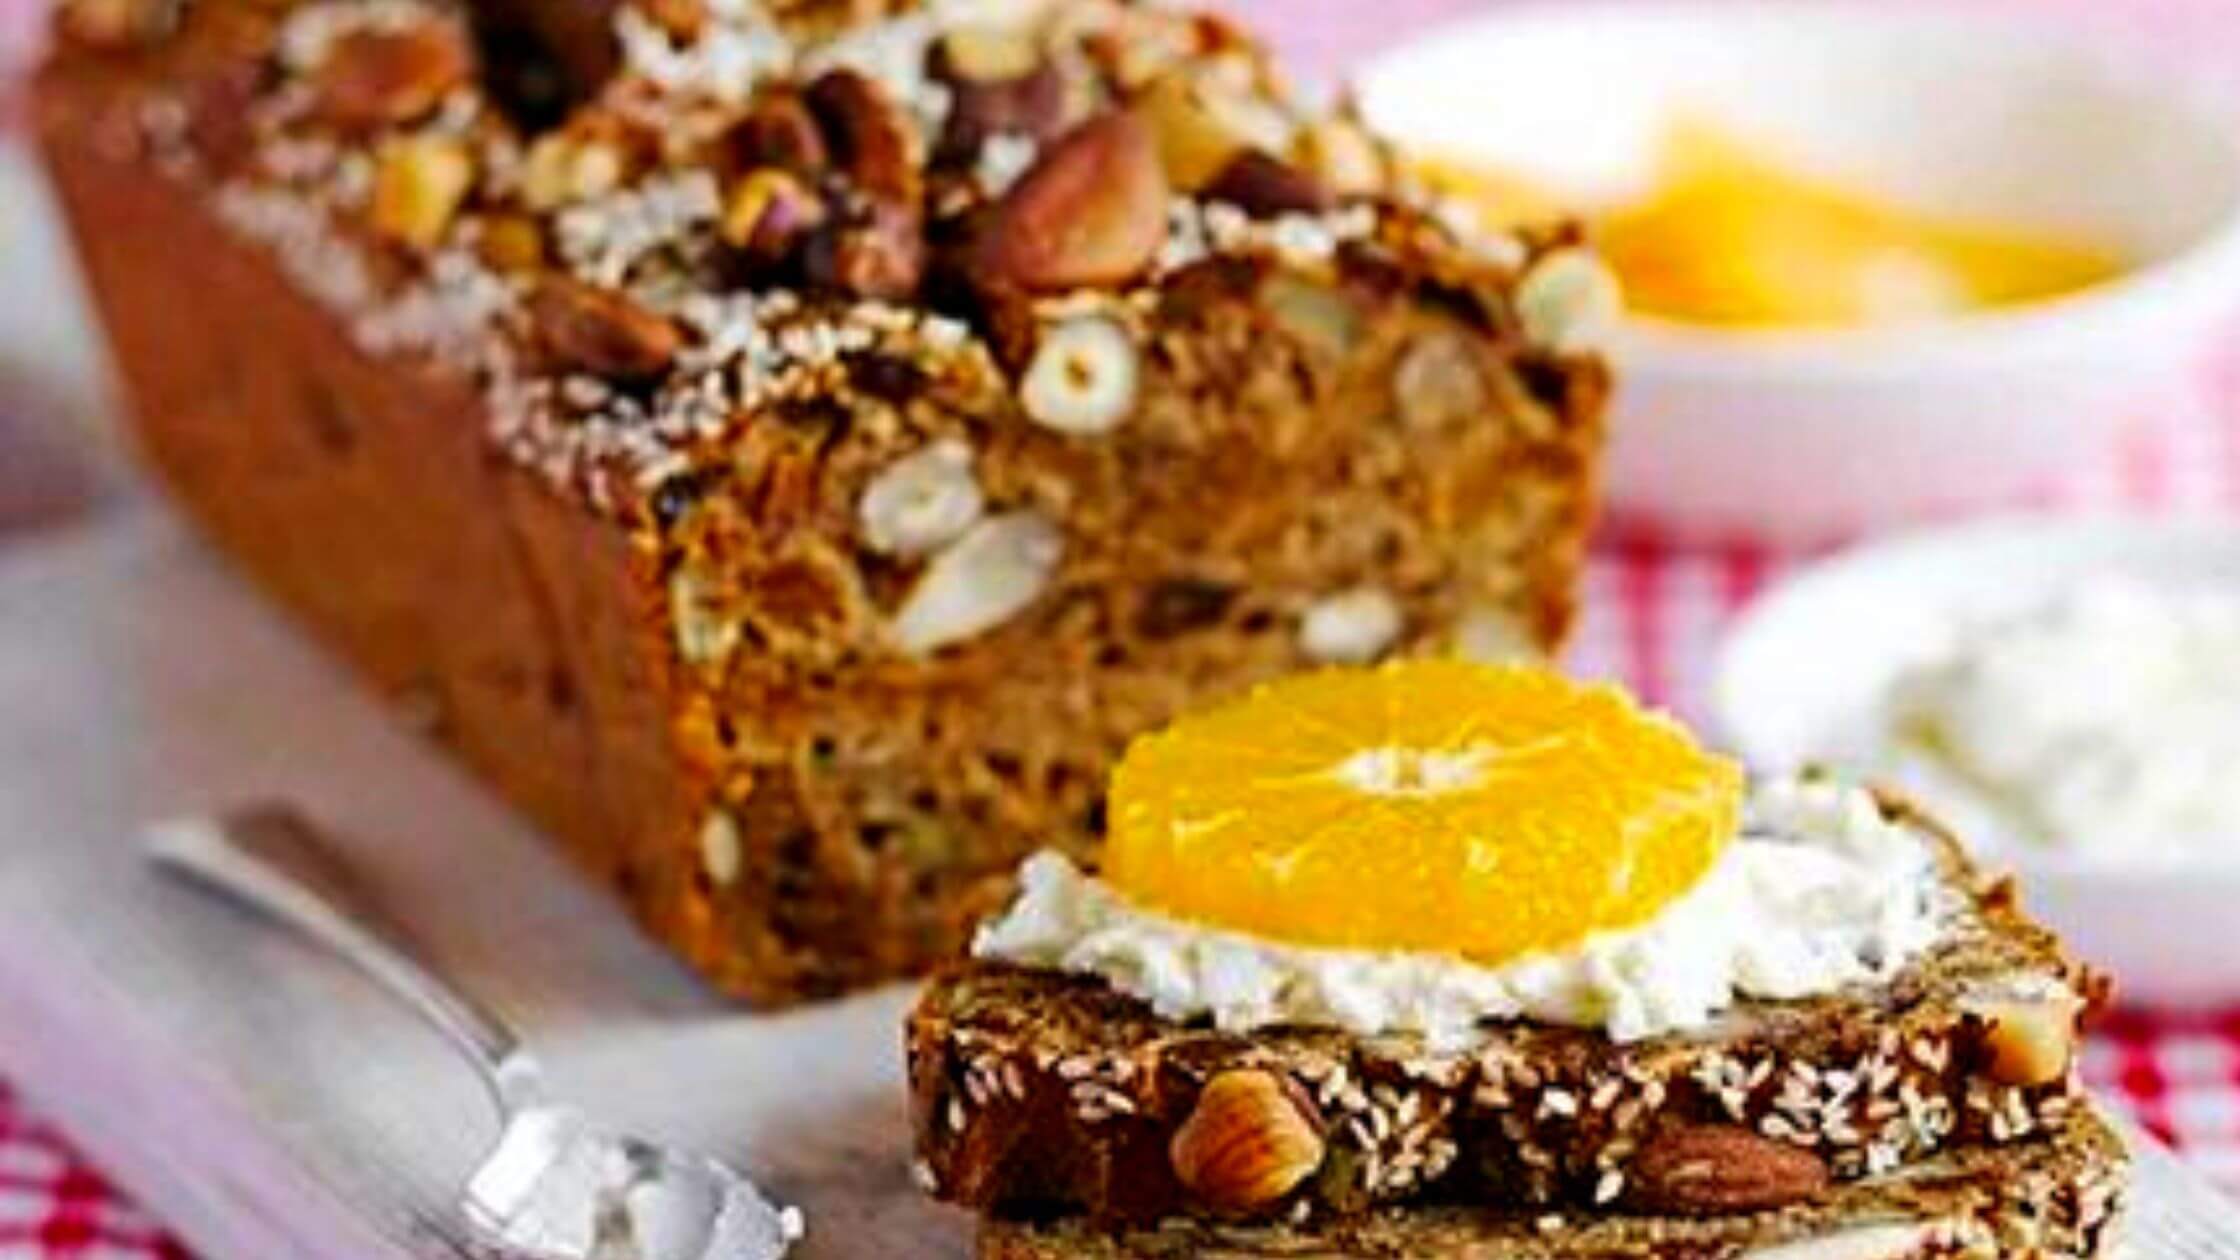 Seed, Nut, And Fig Bread With Fruit And Ricotta Recipe